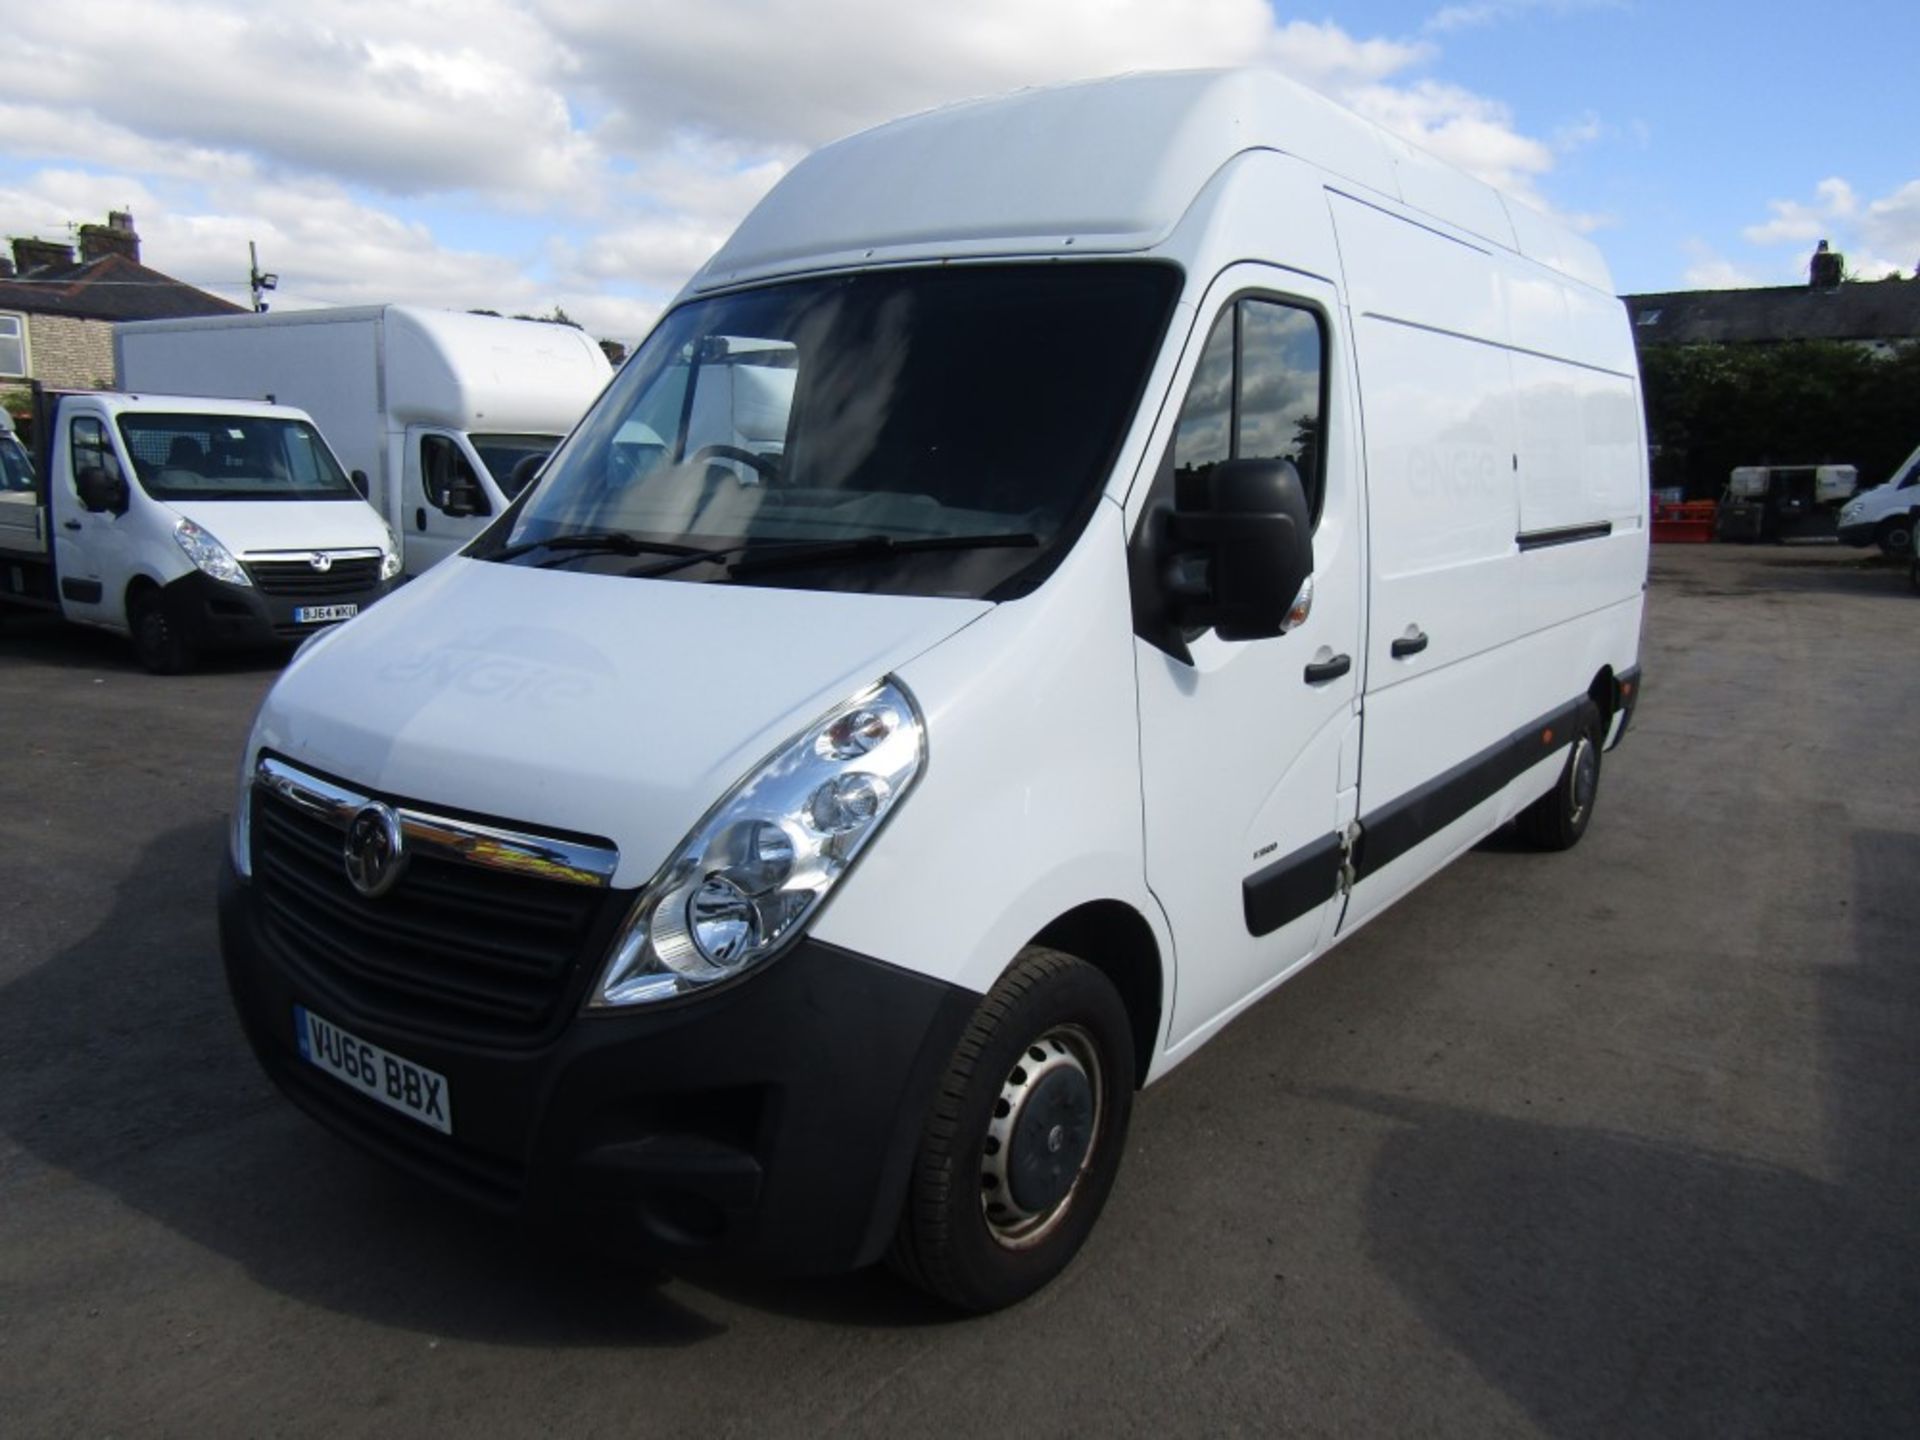 66 reg VAUXHALL MOVANO F3500 L3H3 CDTI, 1ST REG 09/16, TEST 09/22, 58452M, V5 HERE, 1 OWNER FROM NEW - Image 2 of 7